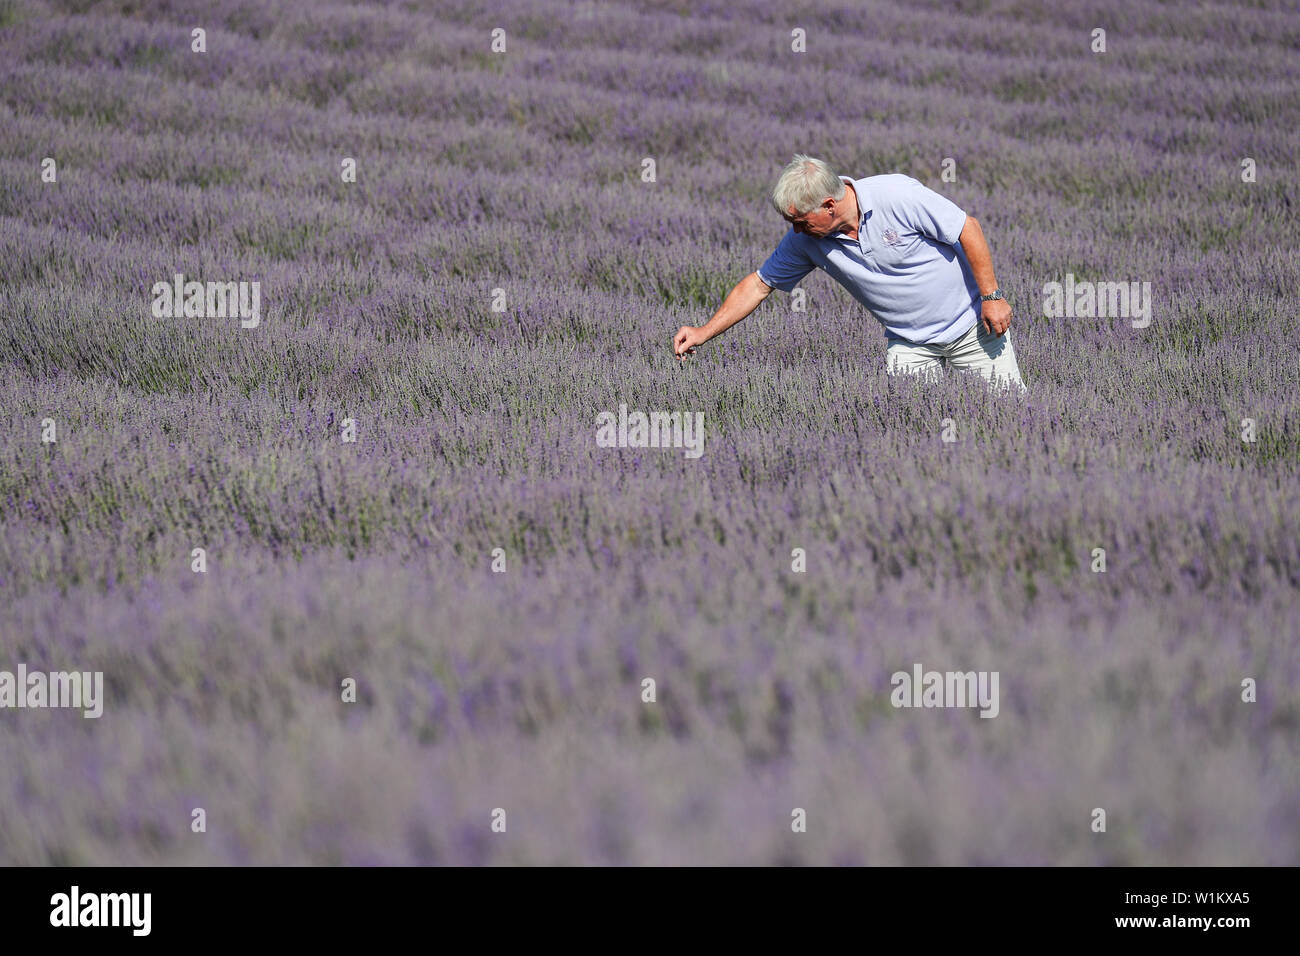 Andrew Elms, owner of Lordington Lavender in West Sussex, inspects the rows of lavender ahead of their open week next week, running from 8th to 14th July. Stock Photo